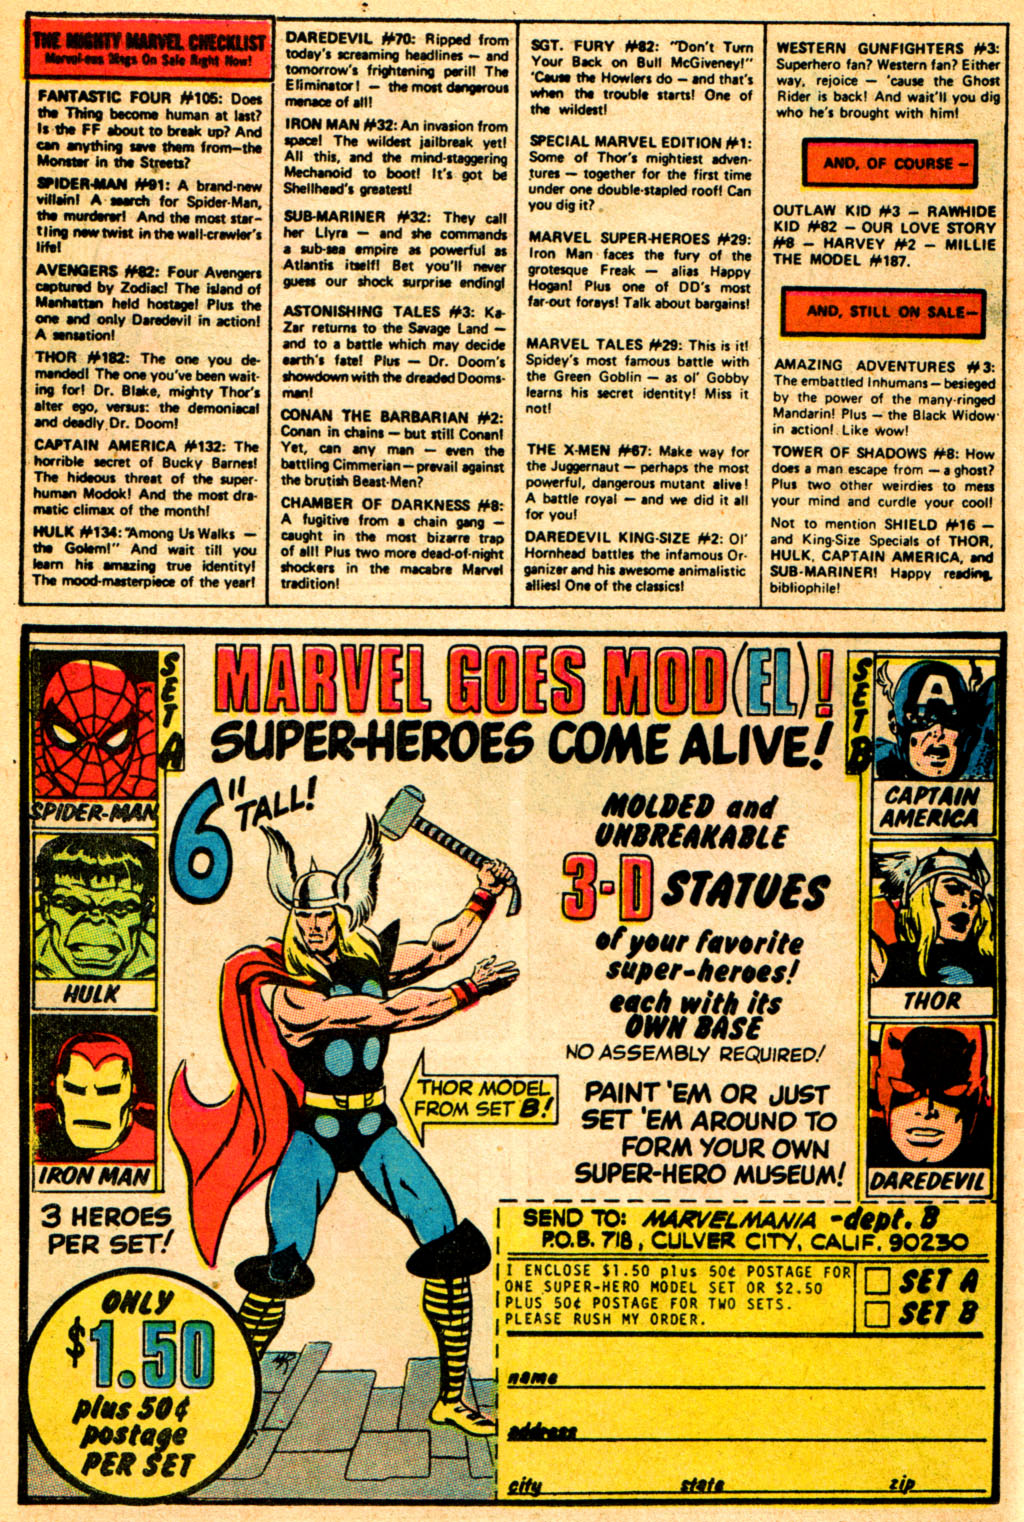 Read online Special Marvel Edition comic -  Issue #1 - 49